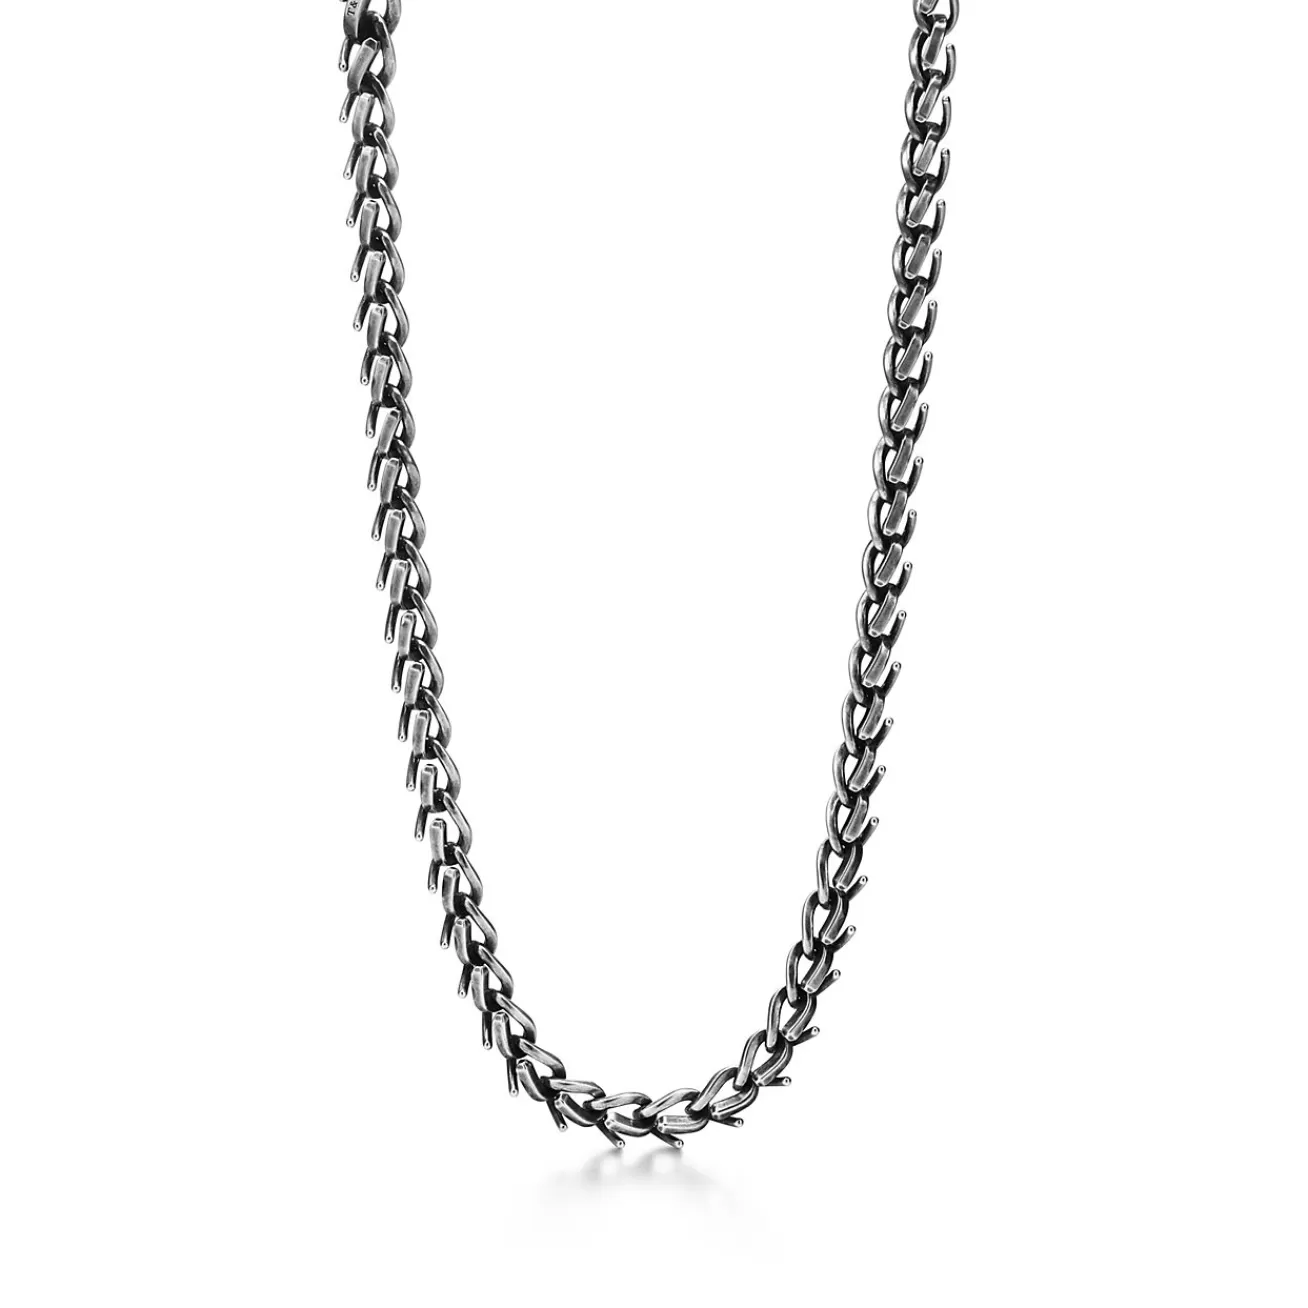 Tiffany & Co. Tiffany Forge Medium Link Necklace in Blackened Sterling Silver | ^ Necklaces & Pendants | Men's Jewelry